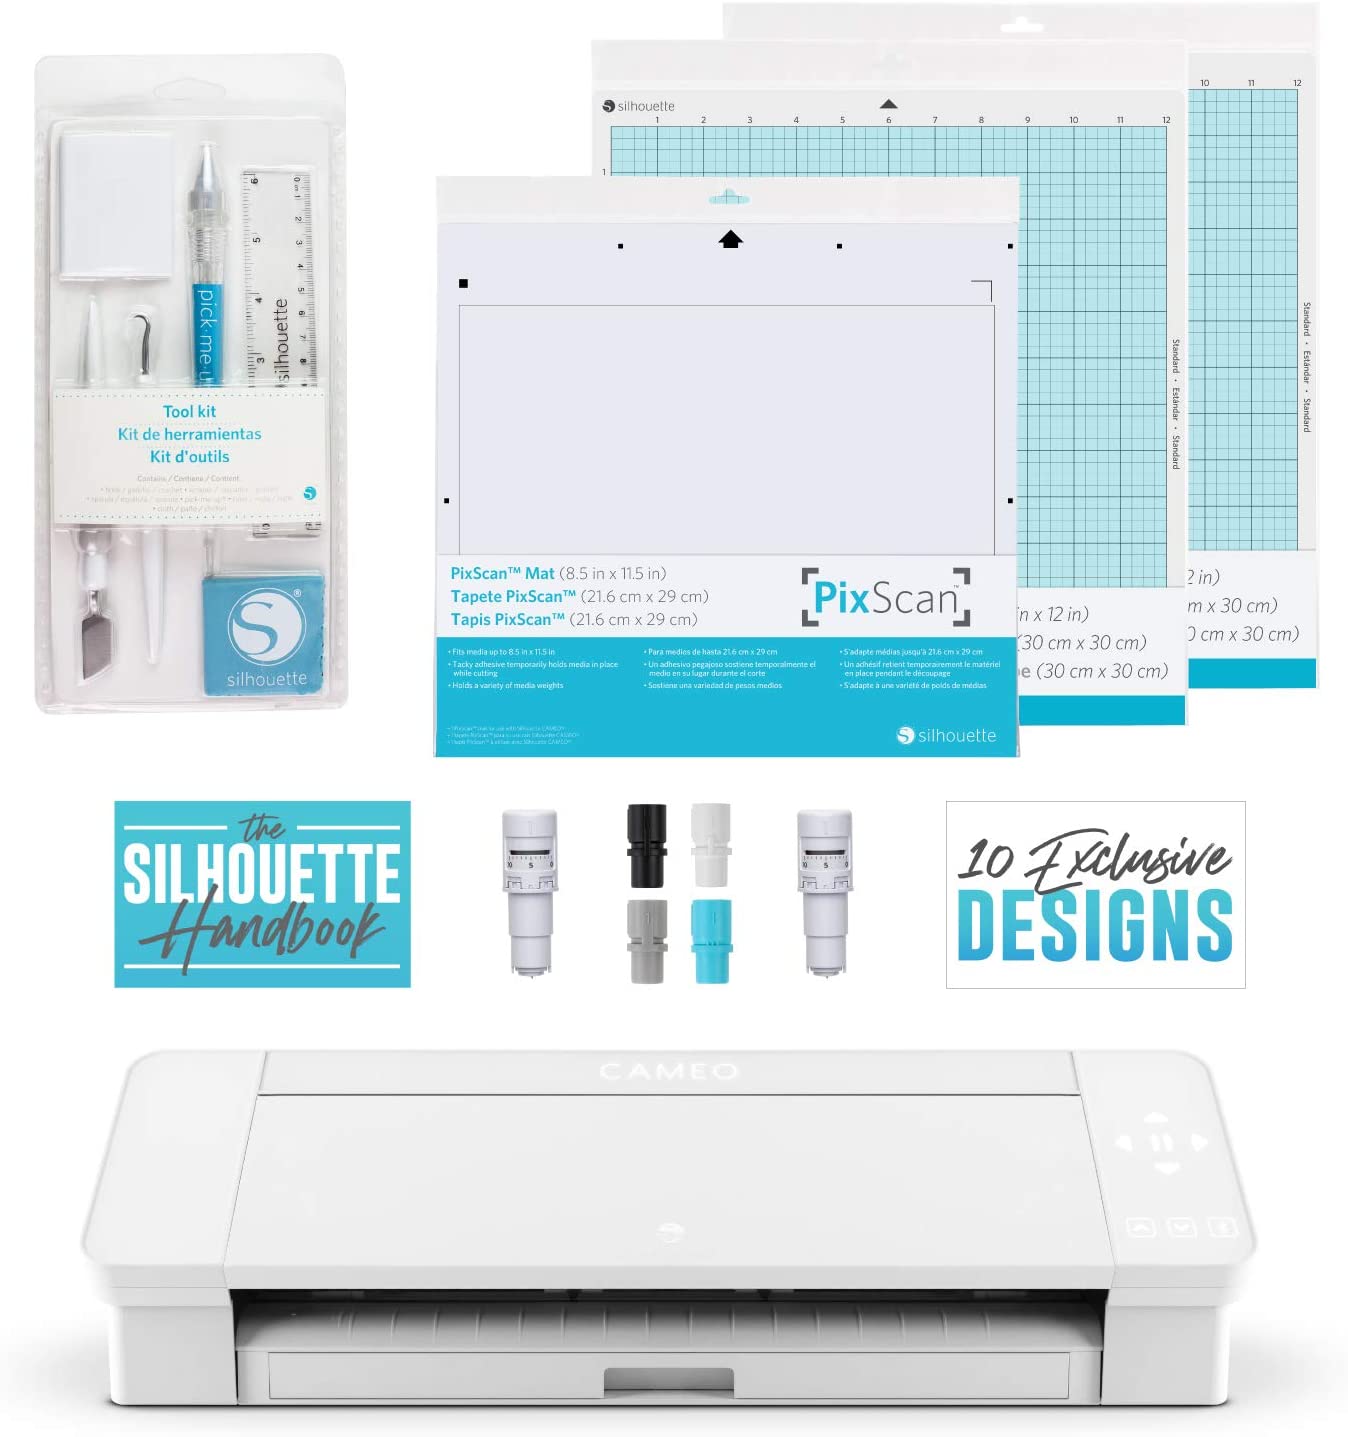  Silhouette Cameo 4 Extras Bundle with Extra AutoBlade, Tool  Kit, Cutting mat and PixScan. Silhouette Handbook,10 Extra Designs - Black  Edition